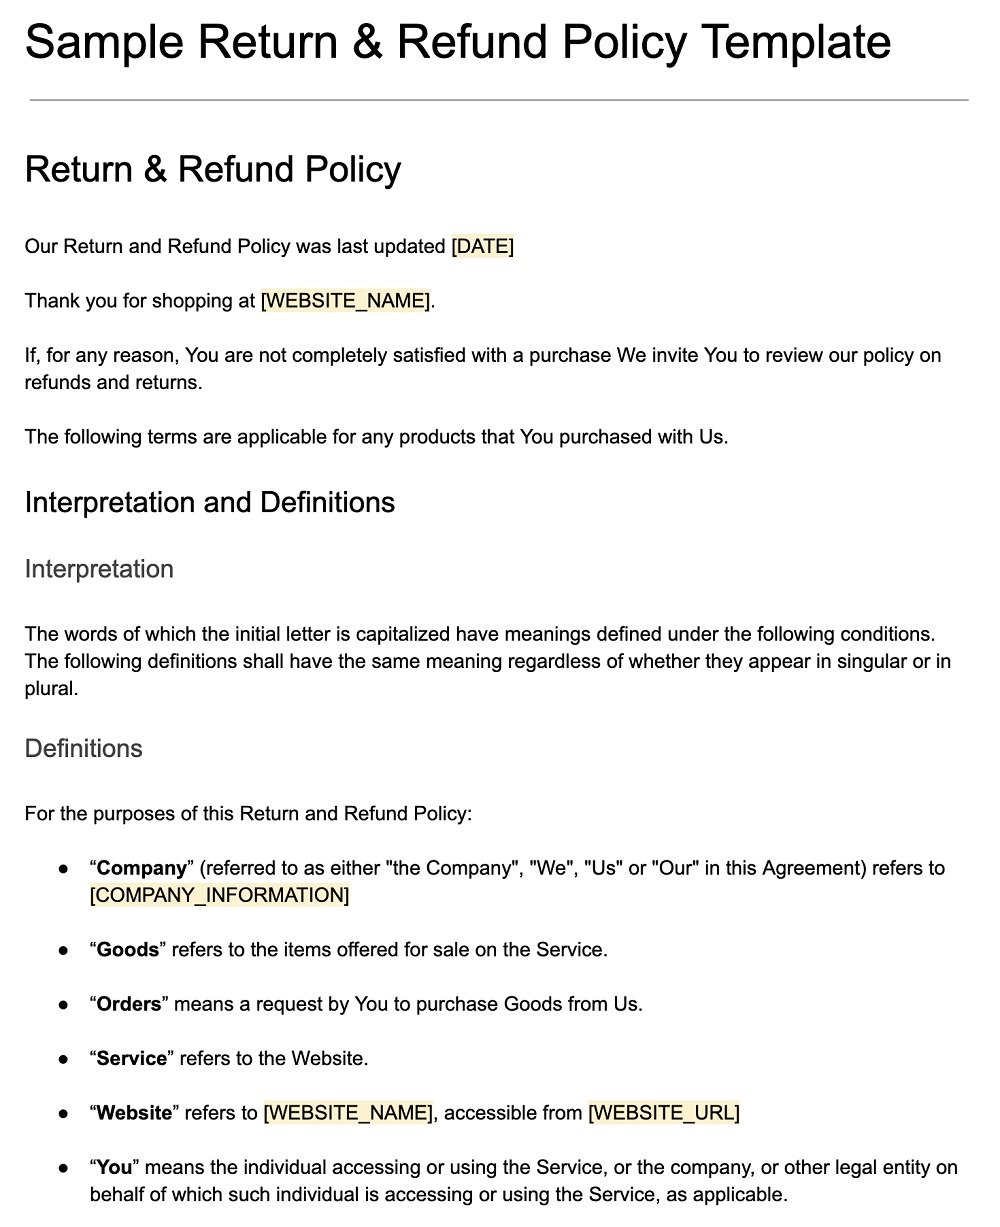 RETURN POLICY & RETAIL SERVICE TERMS – The Shop at Equinox